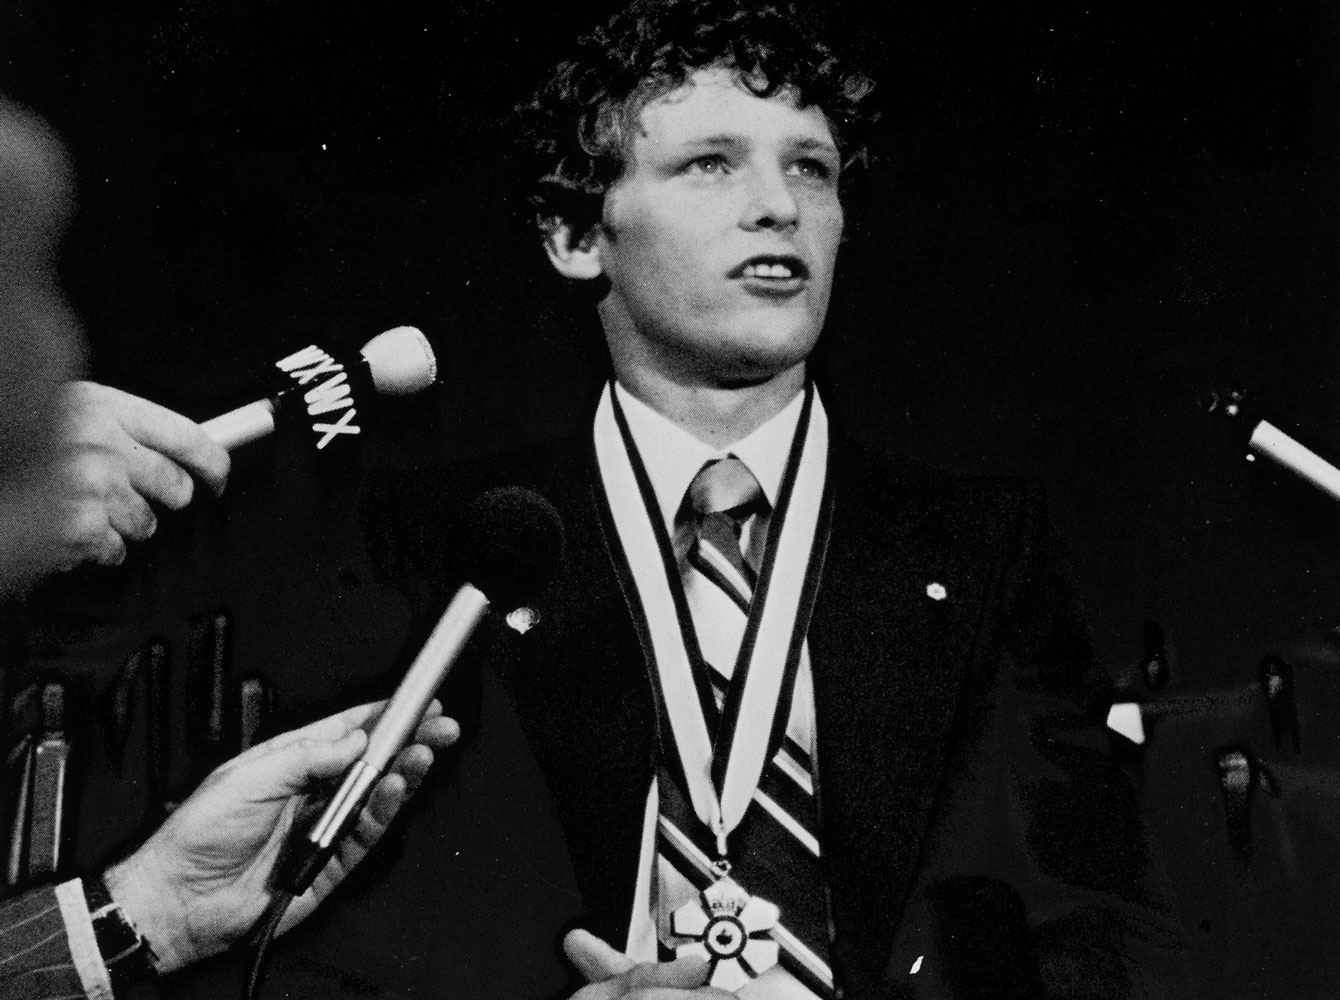 Terry Fox received the Order of Canada in September 1980, shortly after he had to abandon his Marathon of Hope. 